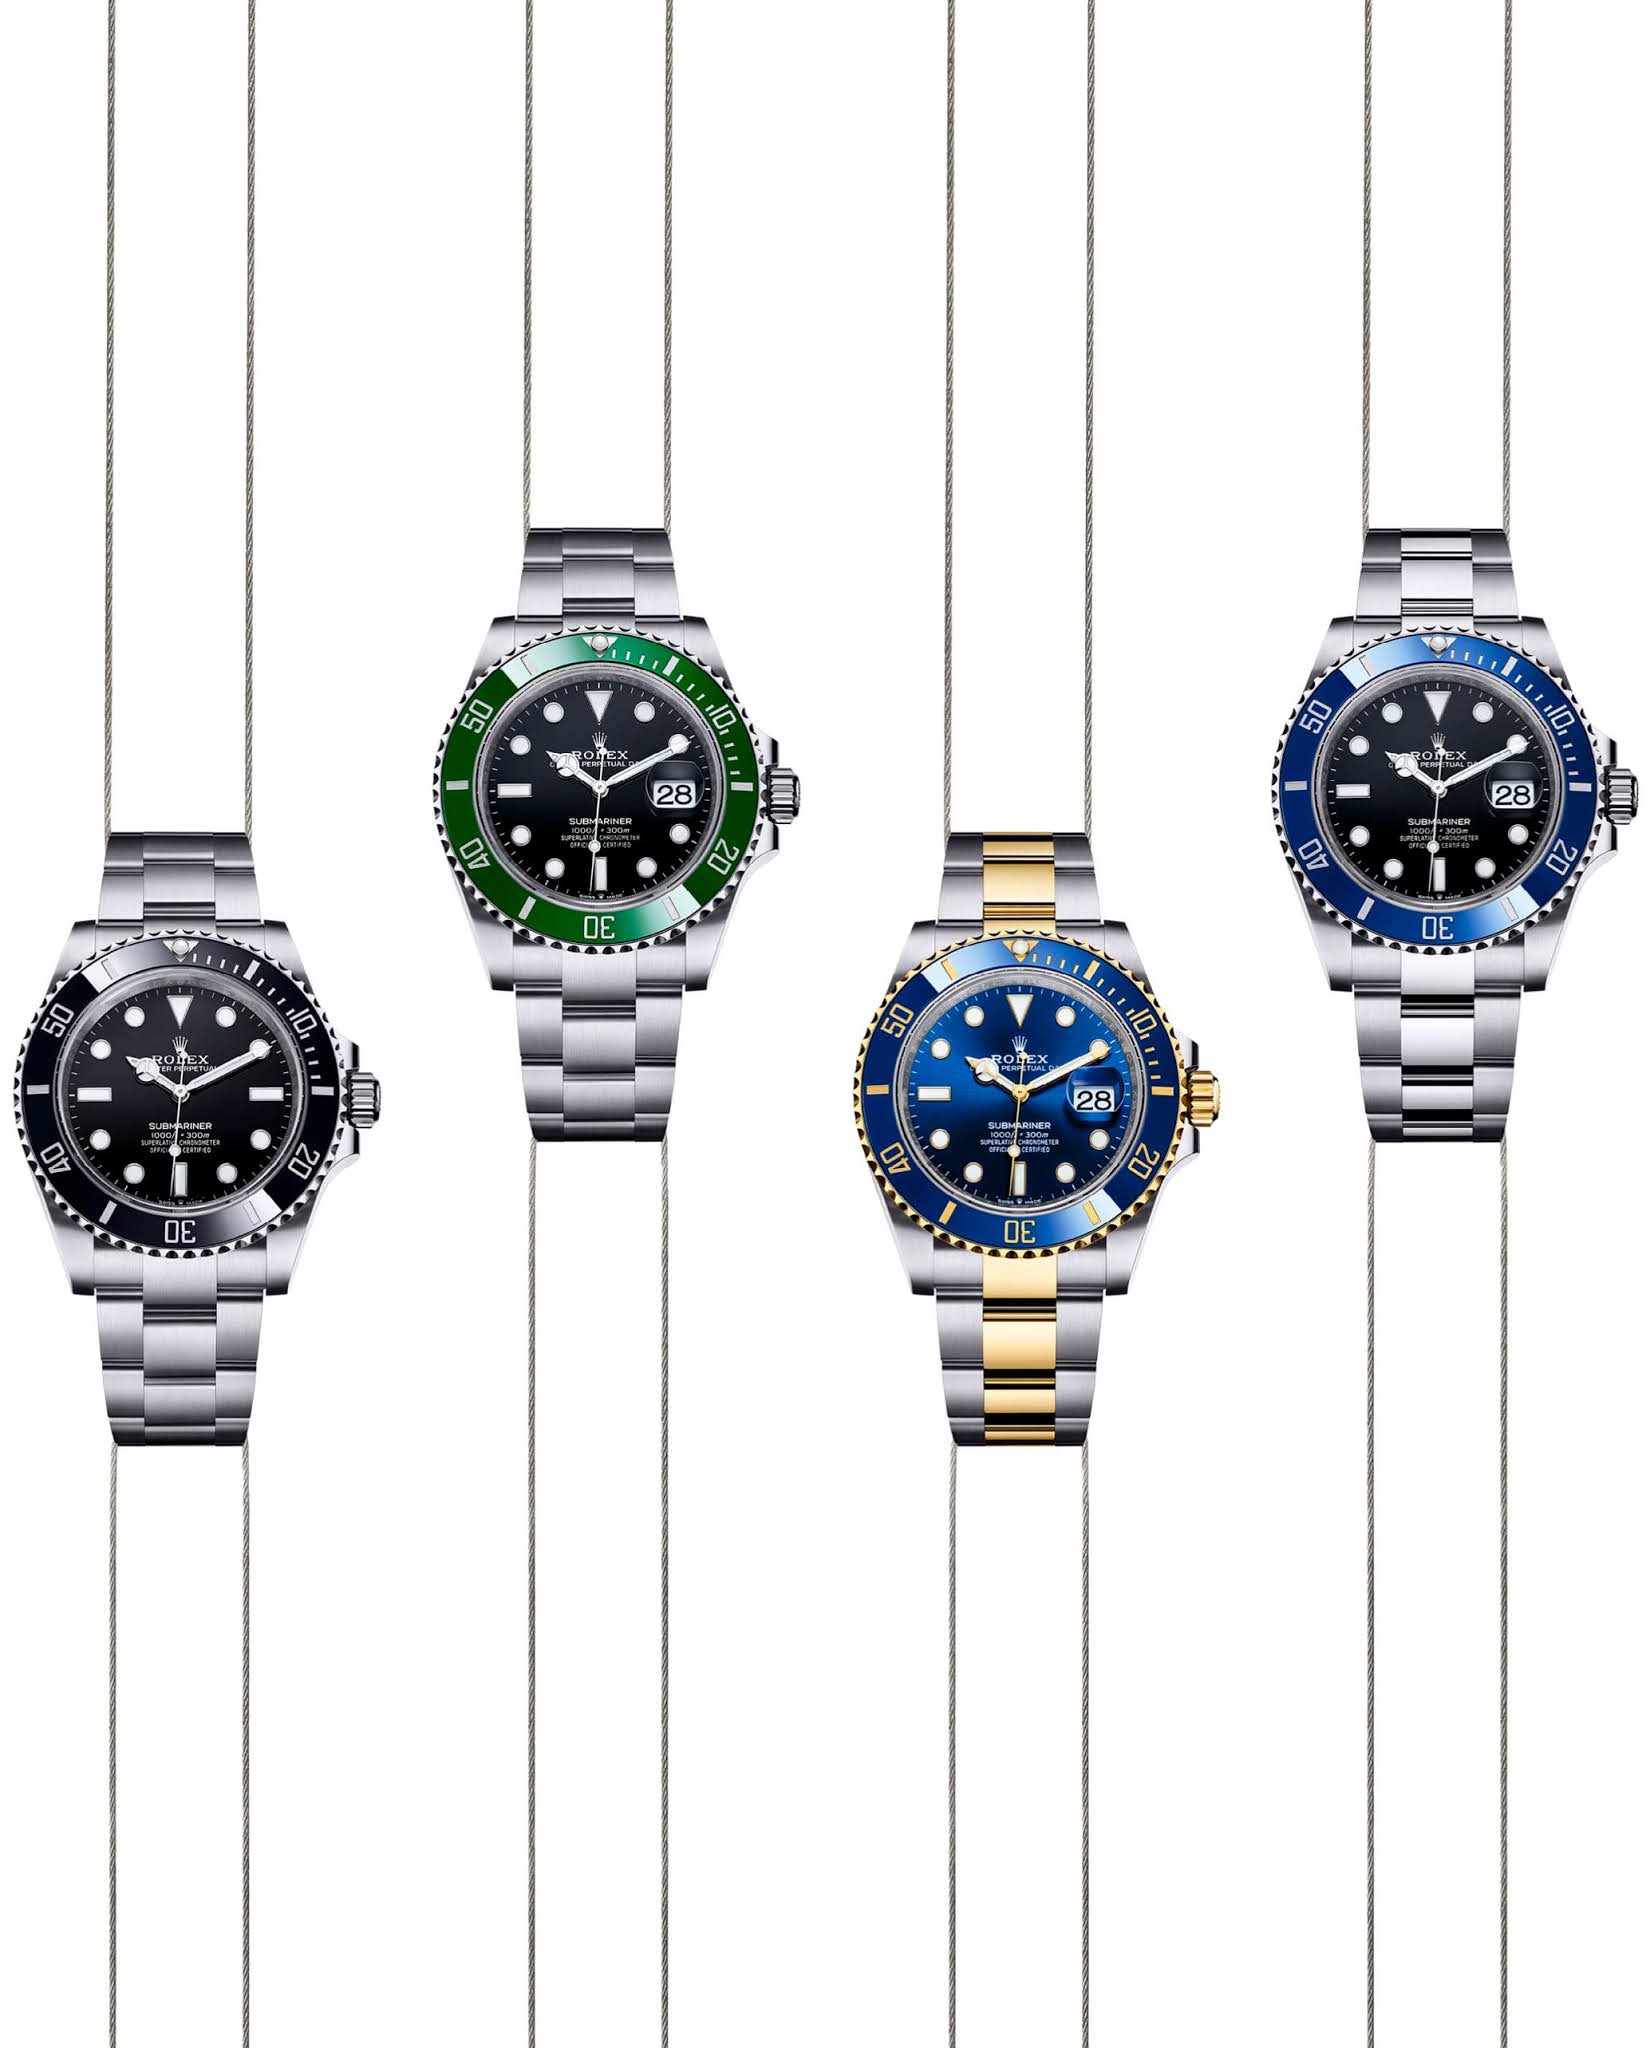 all the rolex models